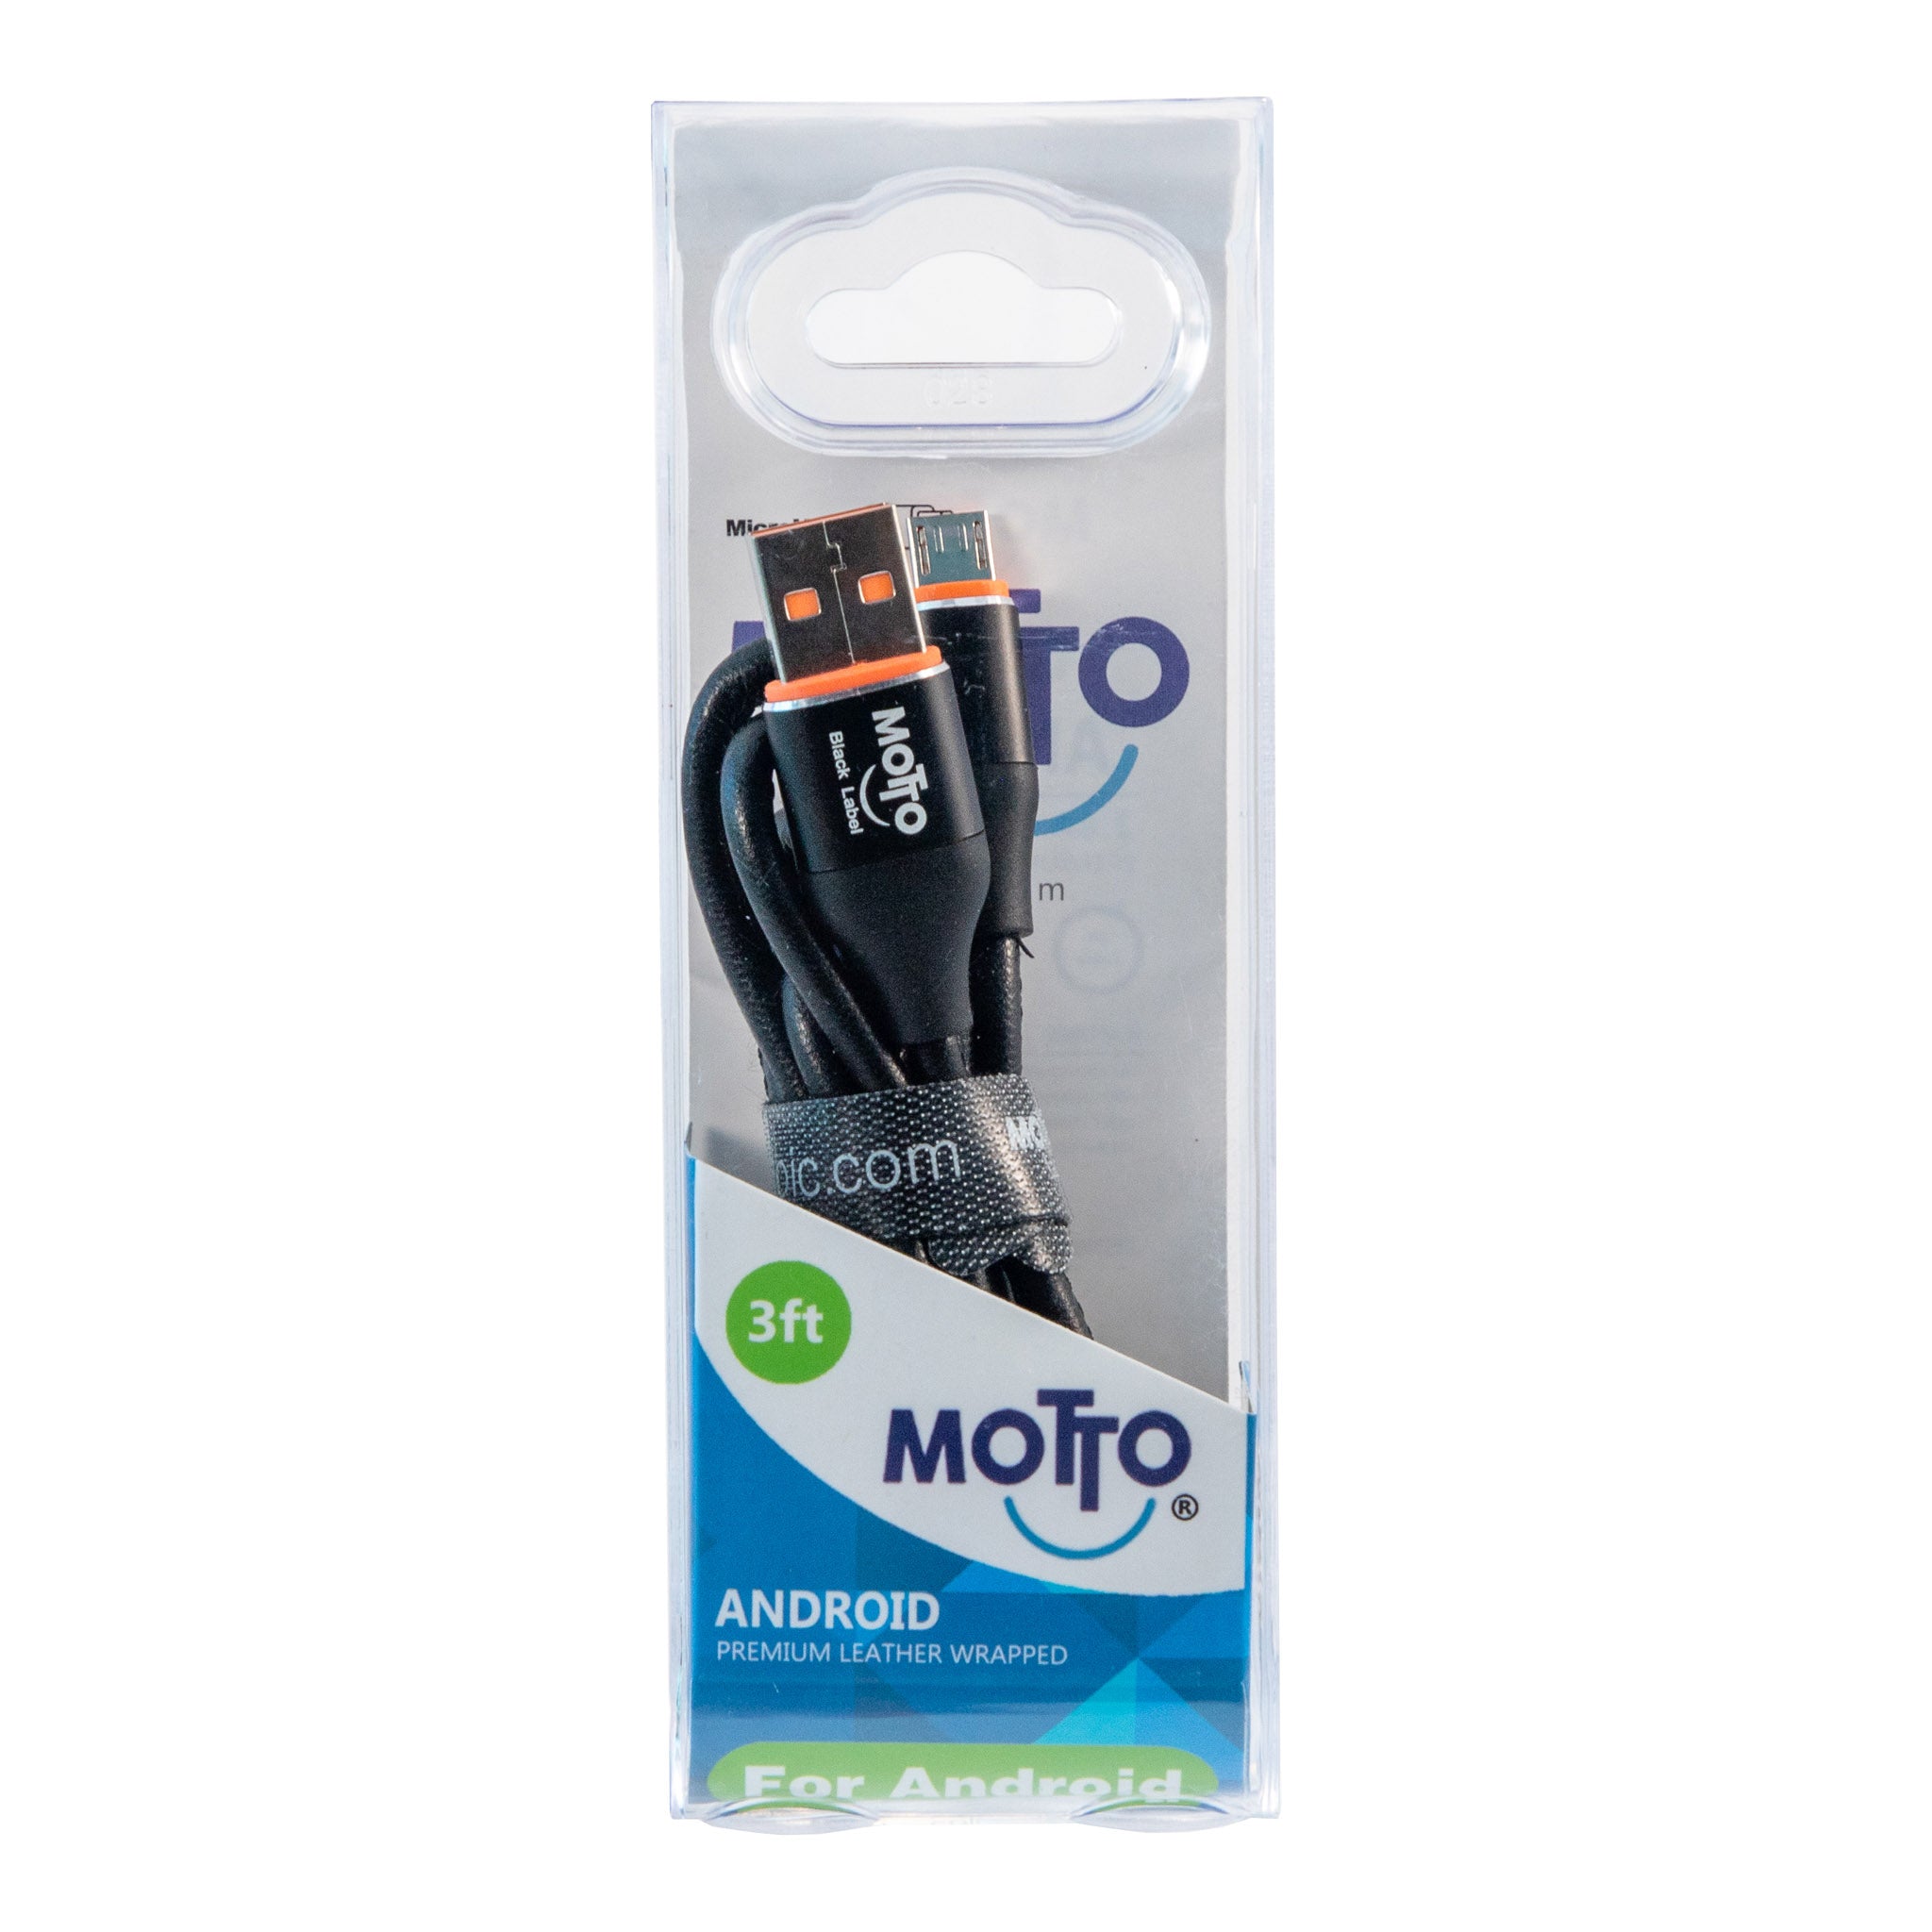 MOTTO] Leather Wrapped Type-C Cable – Motto IC